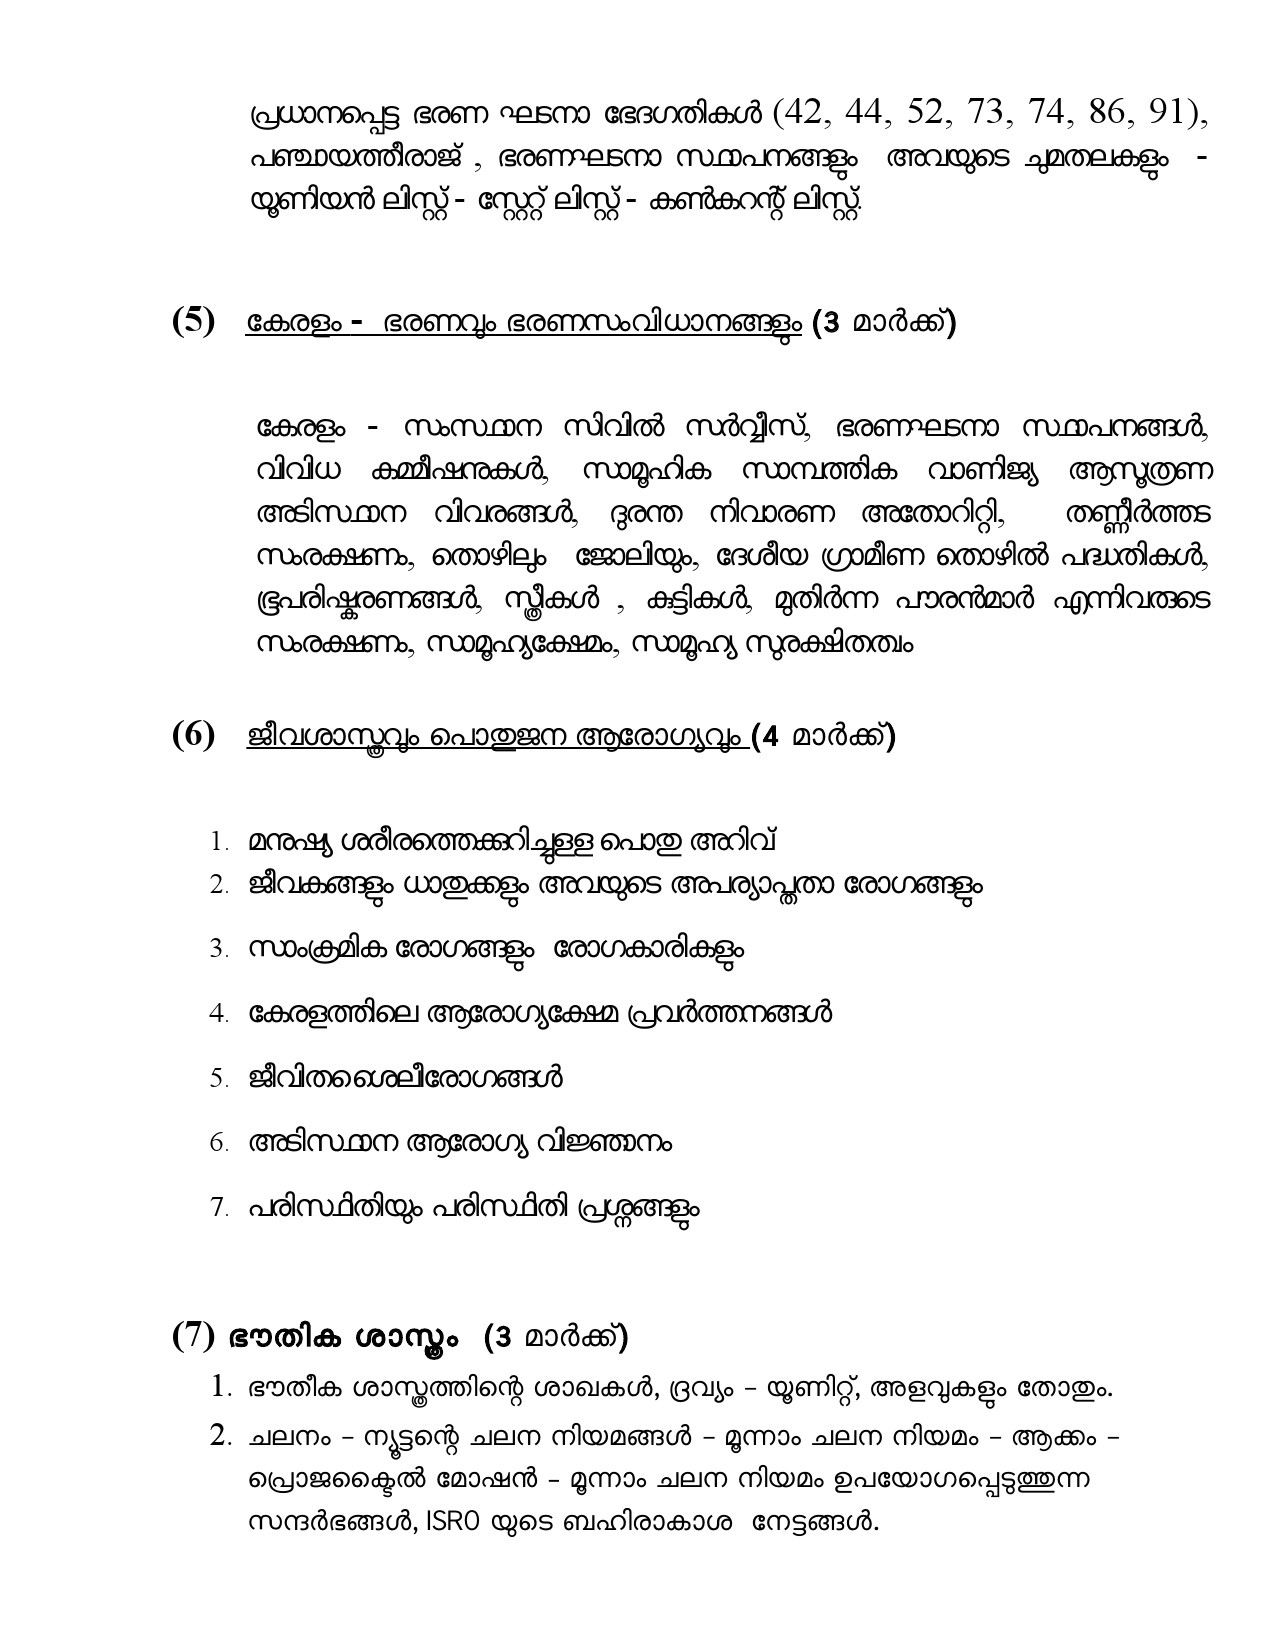 Civil Police Officer Final Examination Syllabus For Plus Two Level - Notification Image 4